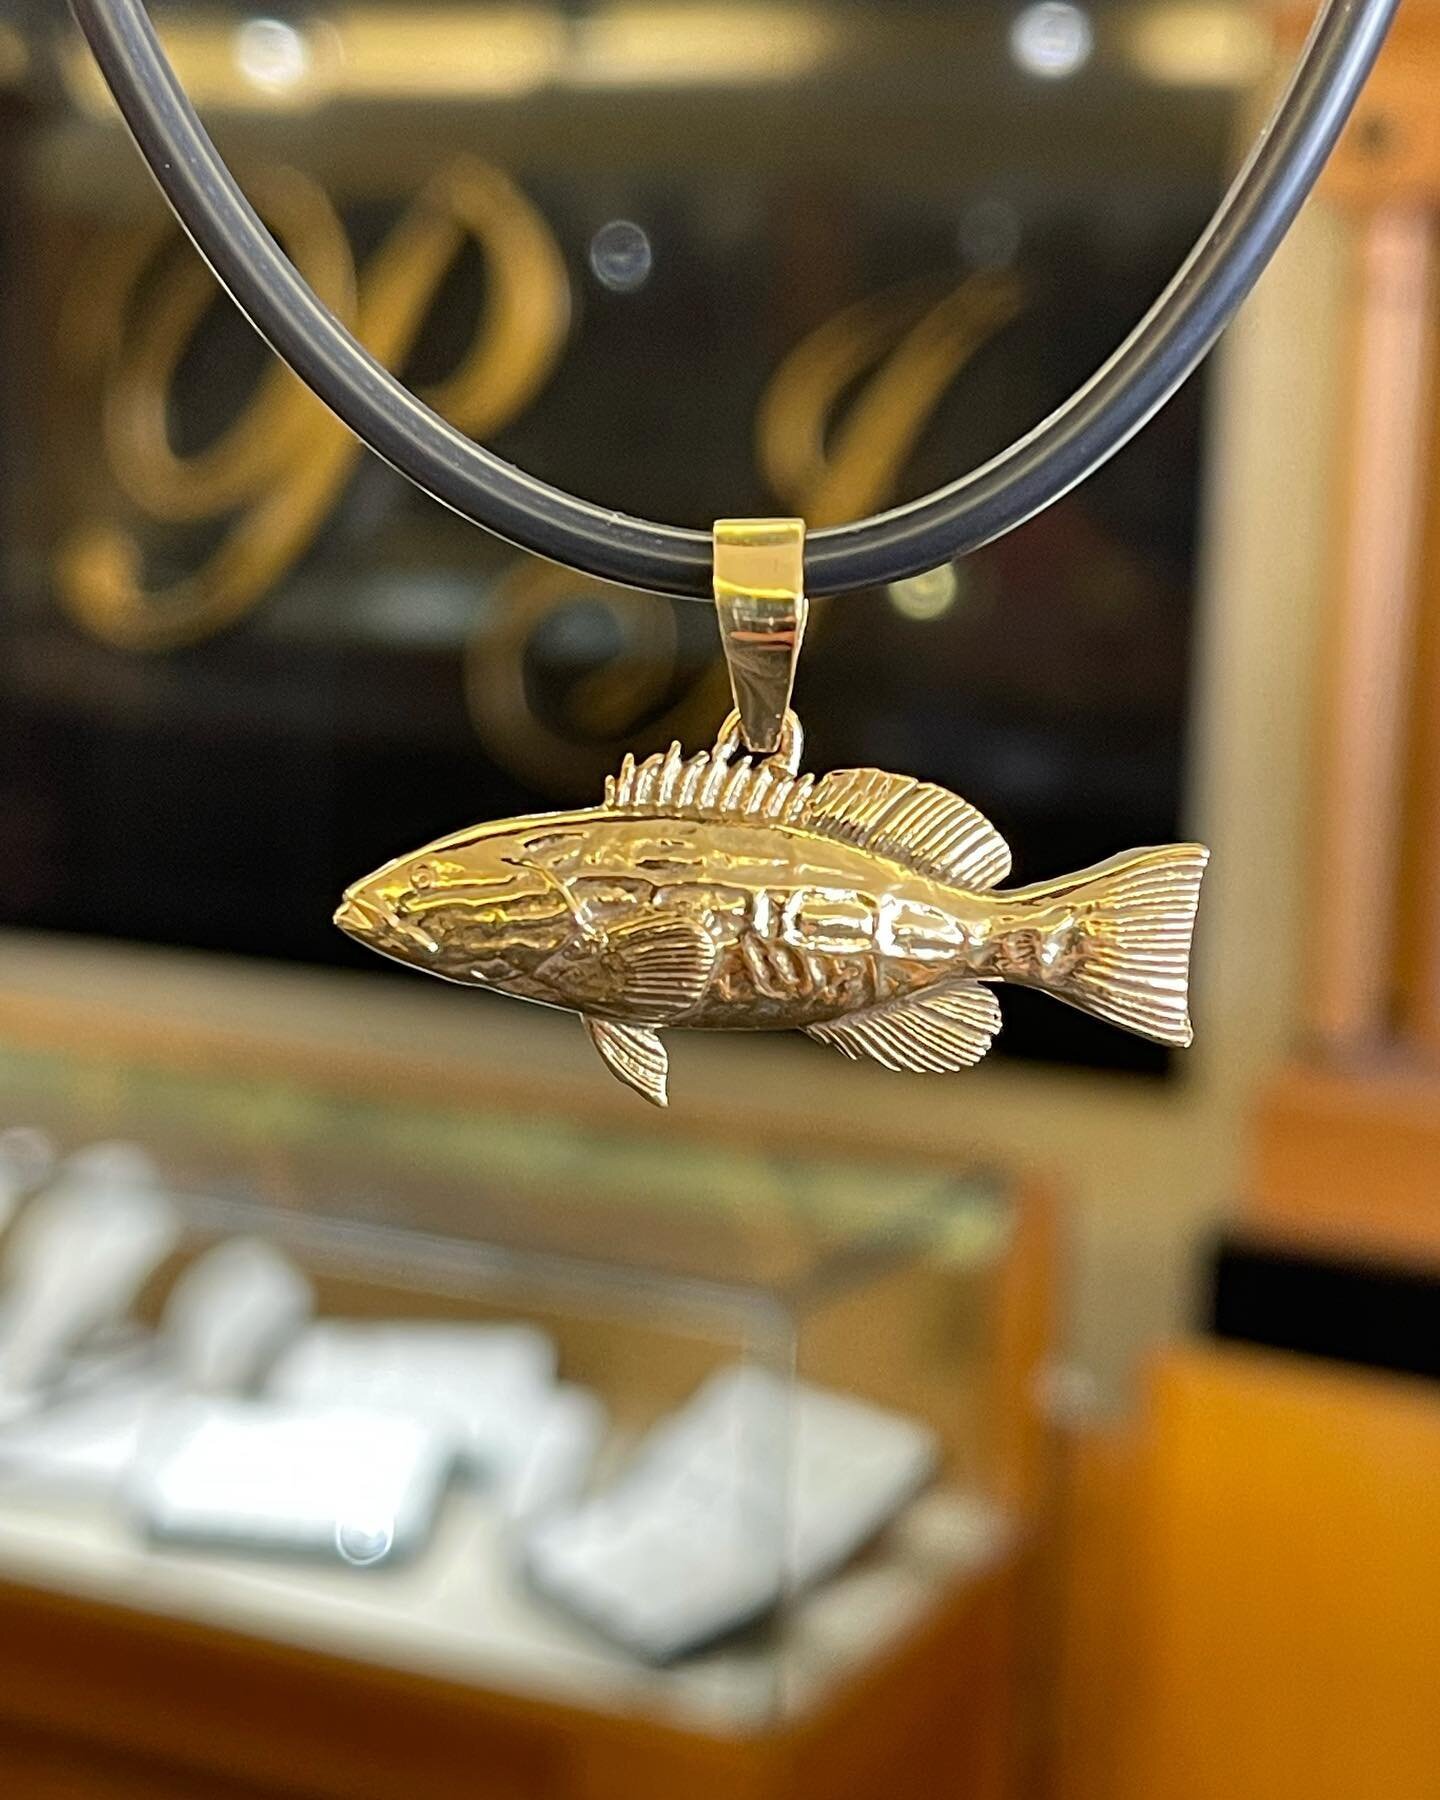 Check out the detail in this Grouper pendant that we made in 22kt yellow gold 🎣😯👌🏼
.
.
.
#PhilipsonsJewelry #custompendant #grouper #fishpendant #fishjewelry #customjewelry #customjeweler #yellowgold #customdesign #rolex #mensjewelry #grouperpend